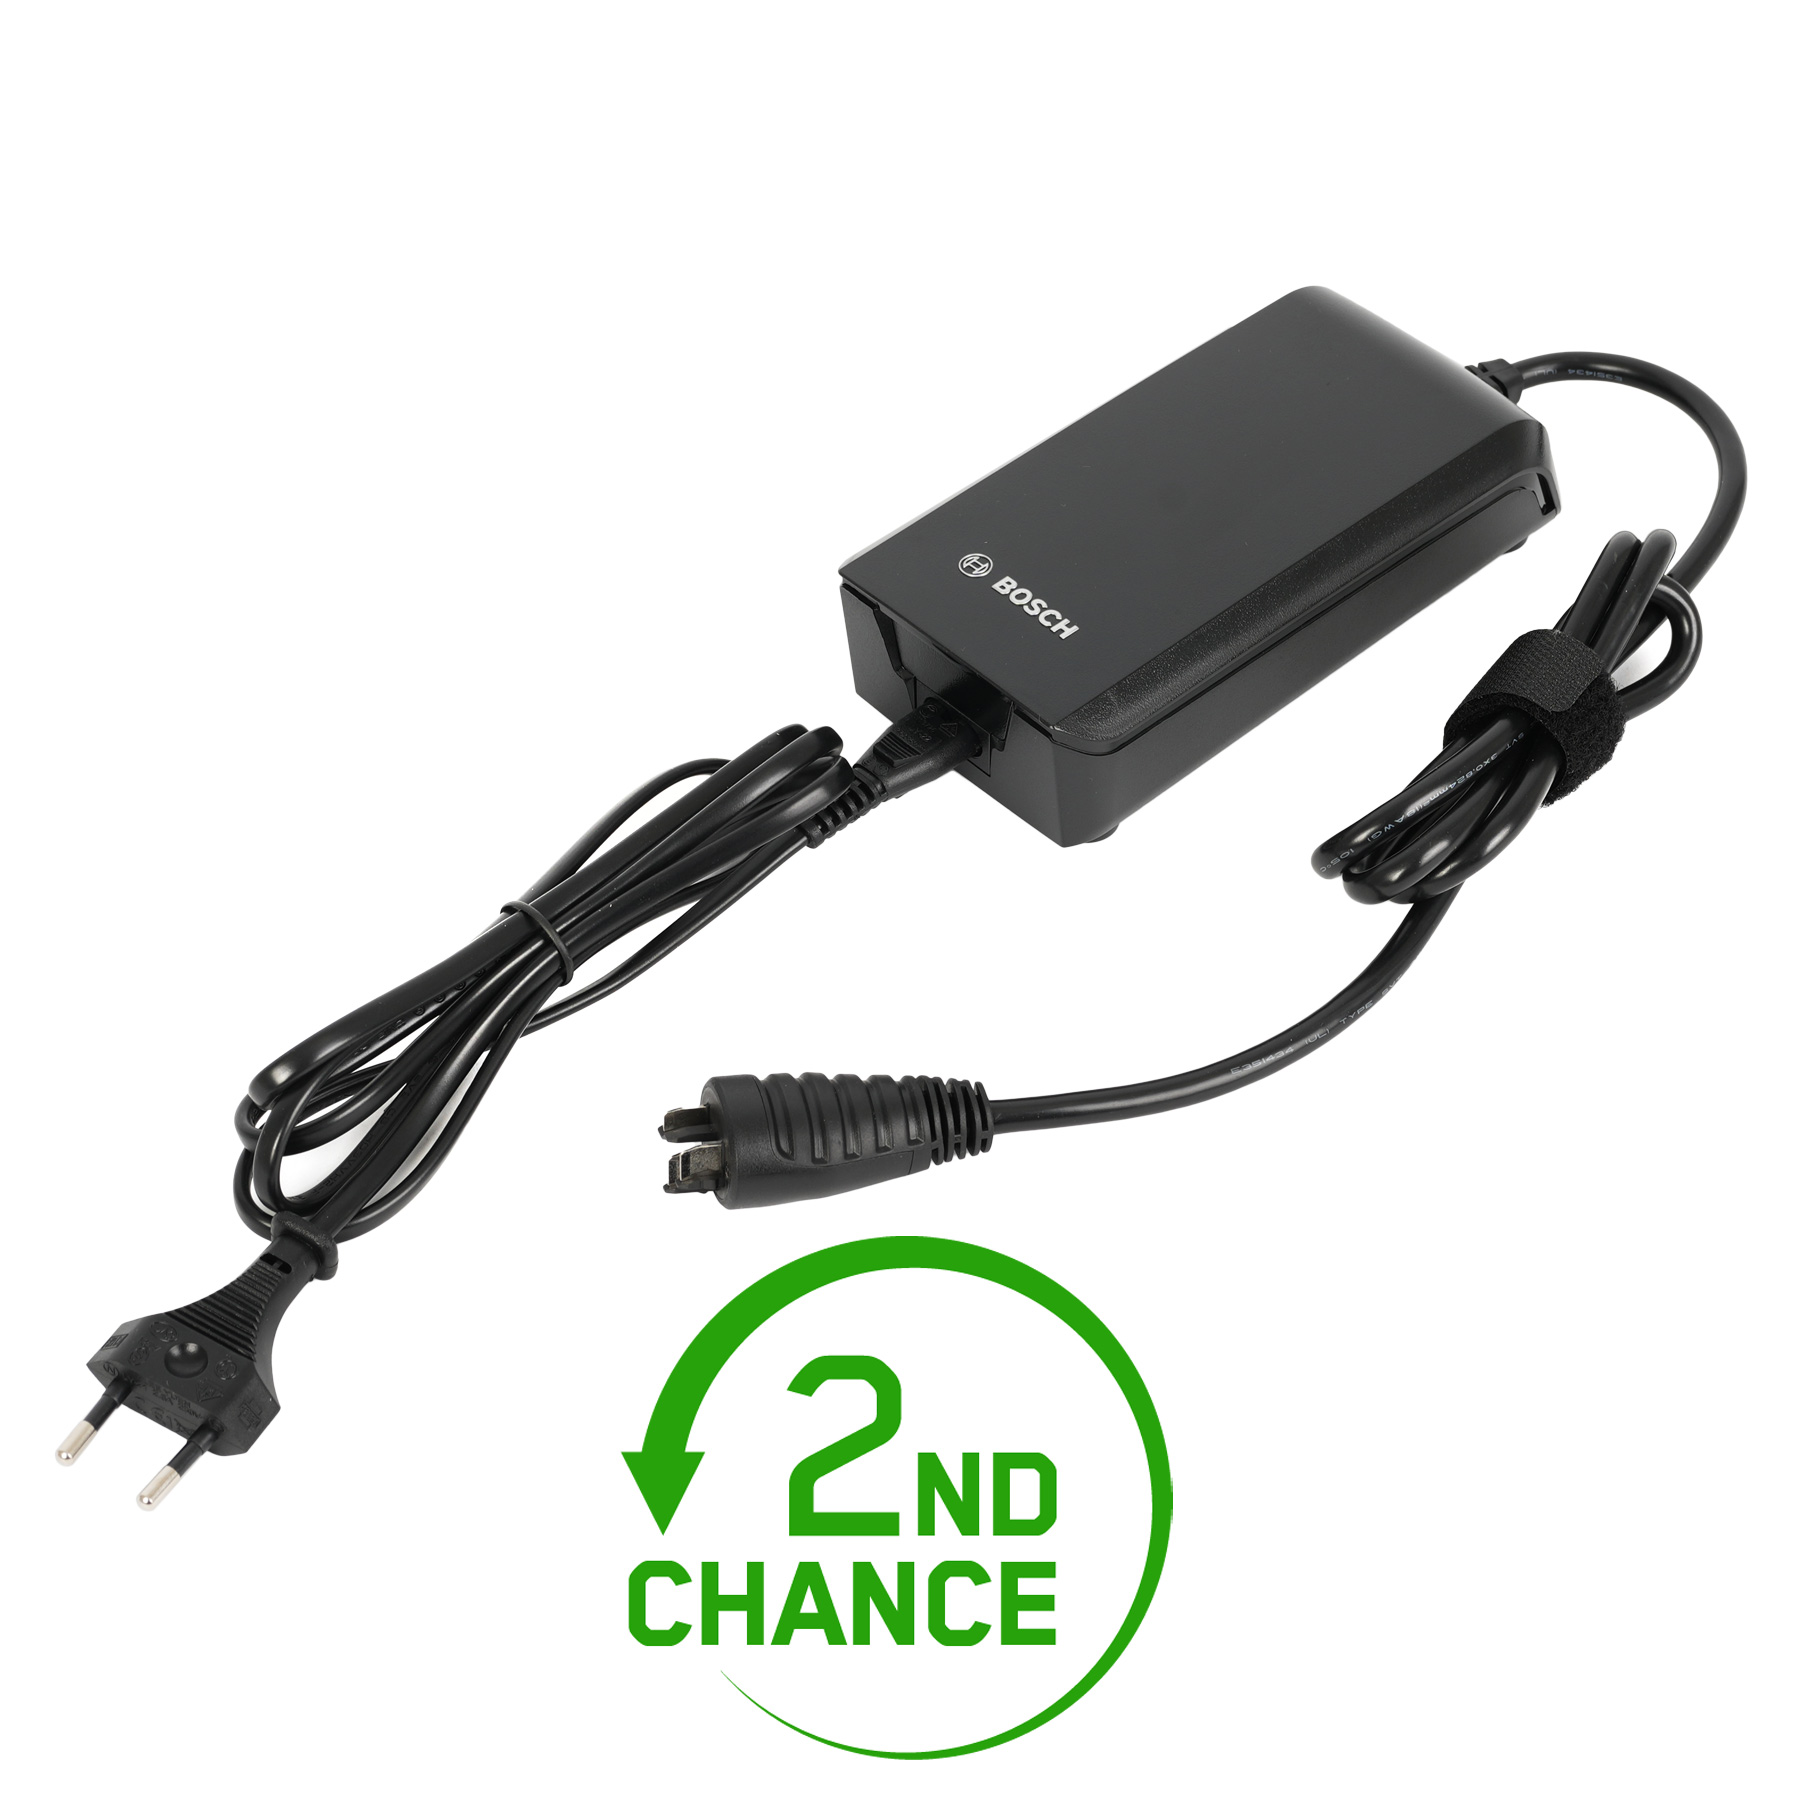 Image of Bosch Compact Charger 2A with Power Cable - black - 2nd Choice